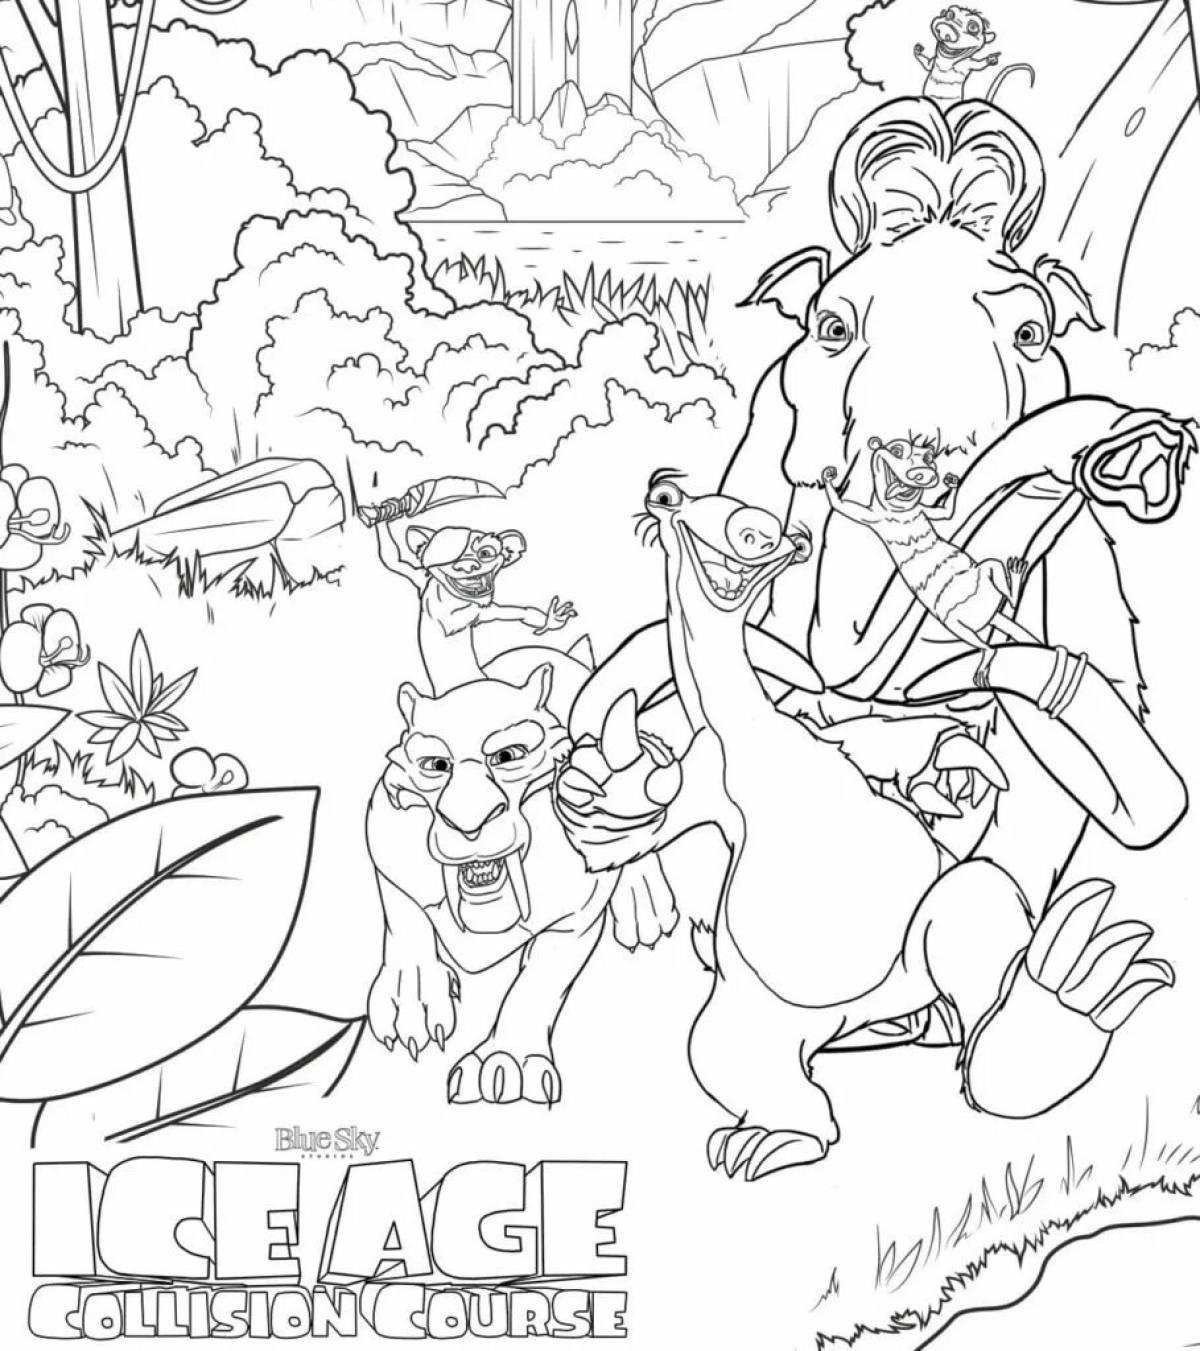 Intriguing Ice Age 4 coloring page